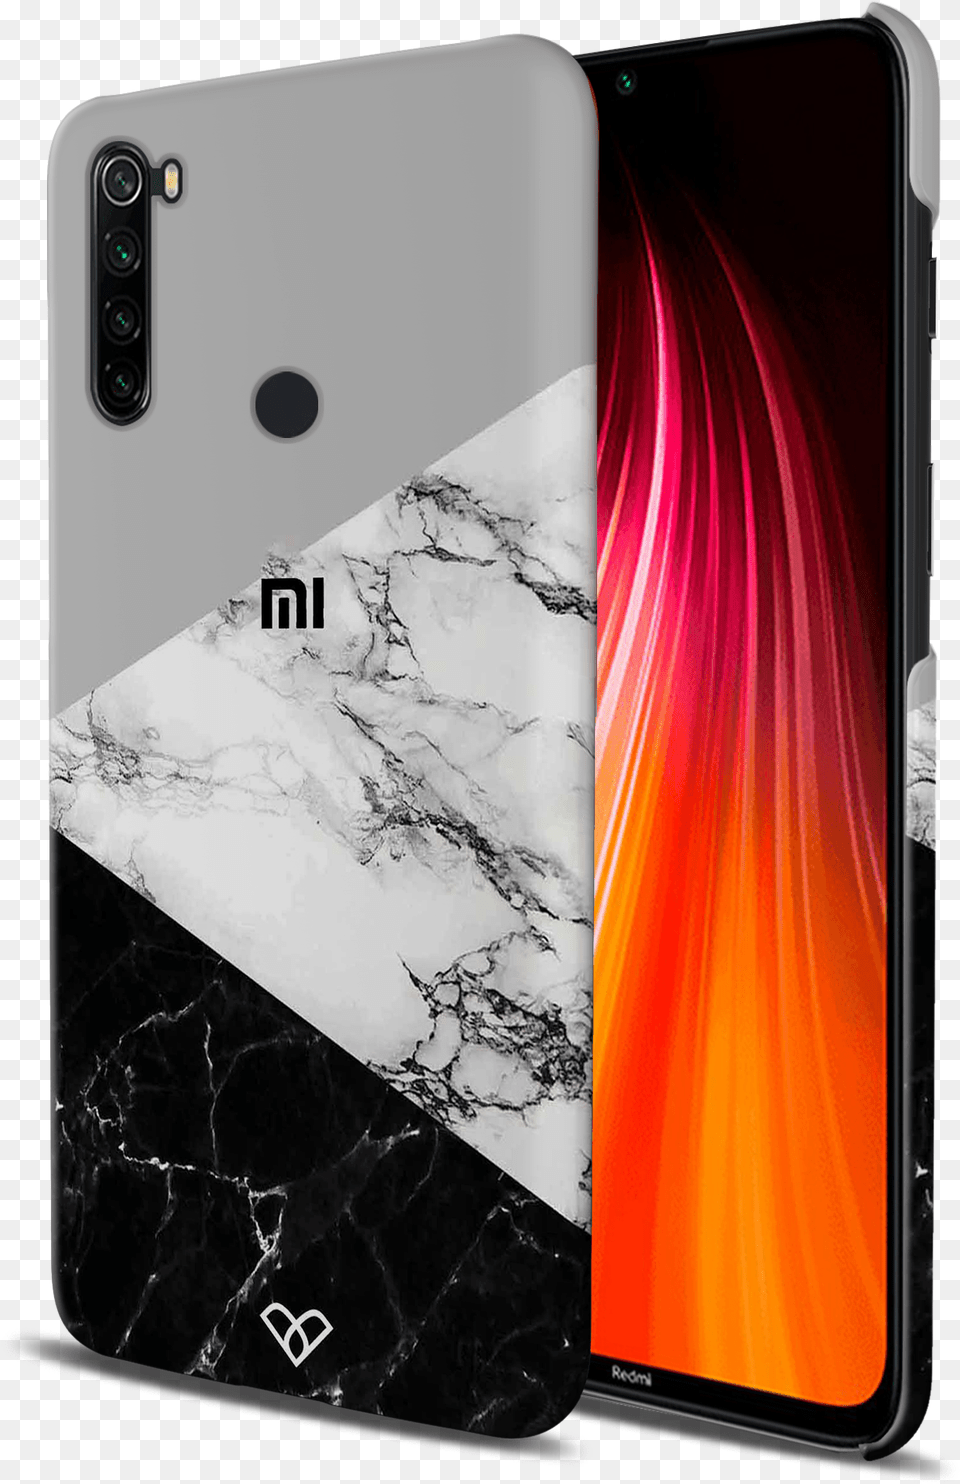 Black And White Marble Slim Case And Cover For Redmi Iphone, Electronics, Mobile Phone, Phone Png Image